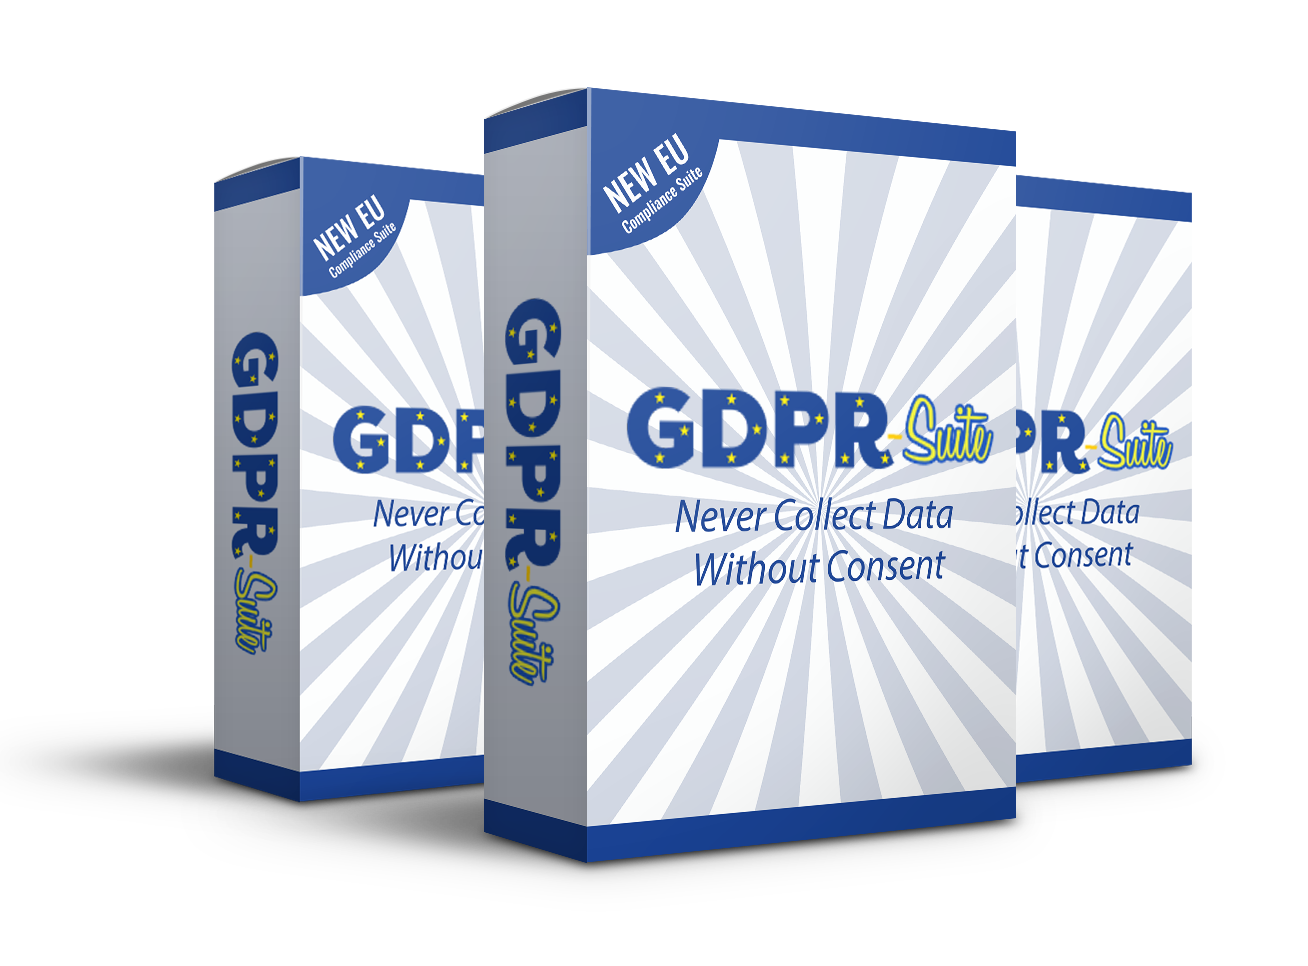 GDPR Suite REVIEW